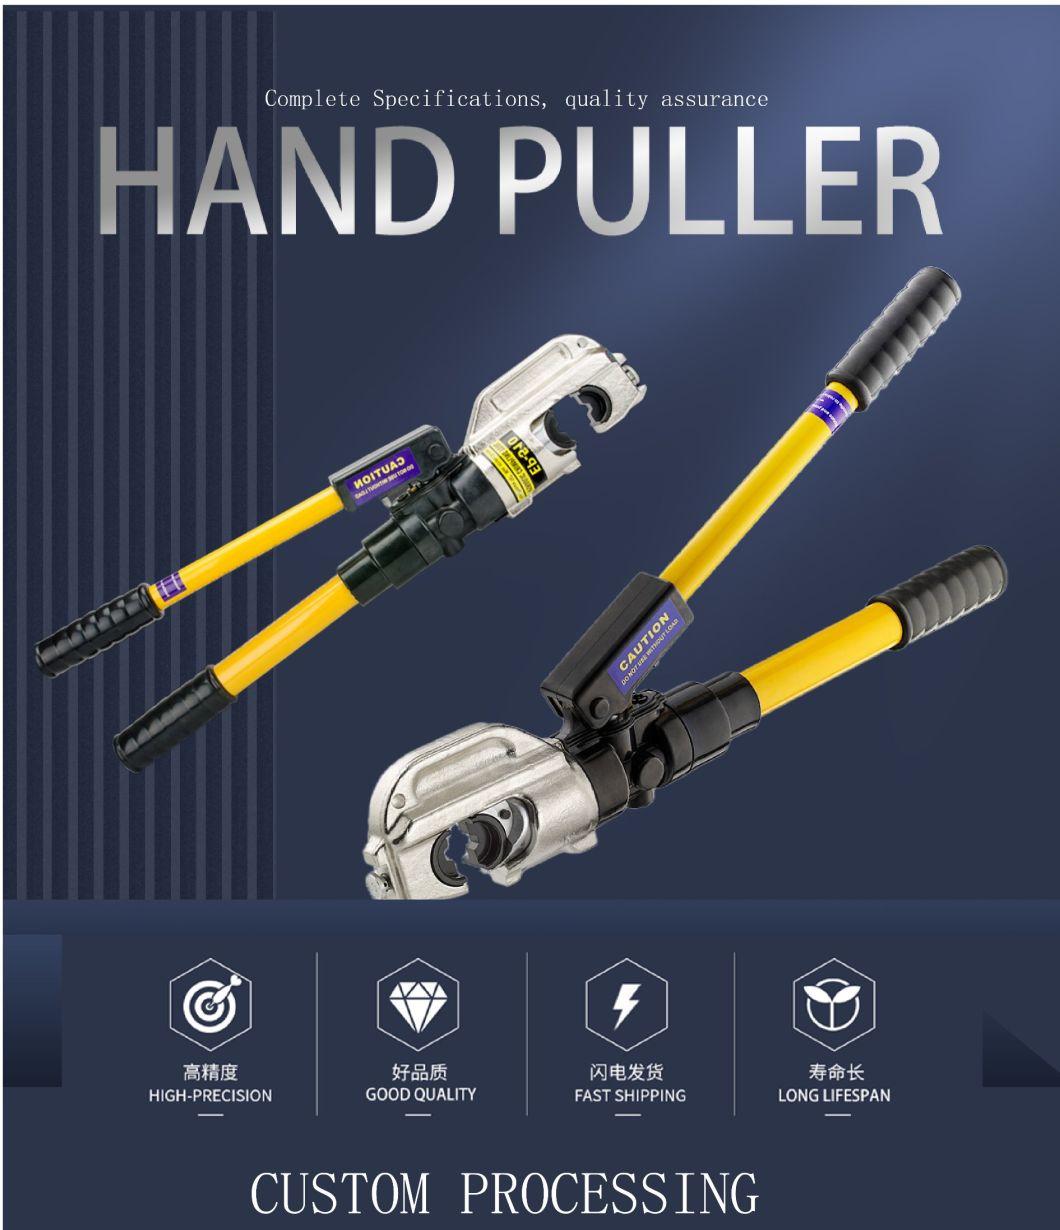 Wholesale New Type Wire Steel Cutters Cable Cutters